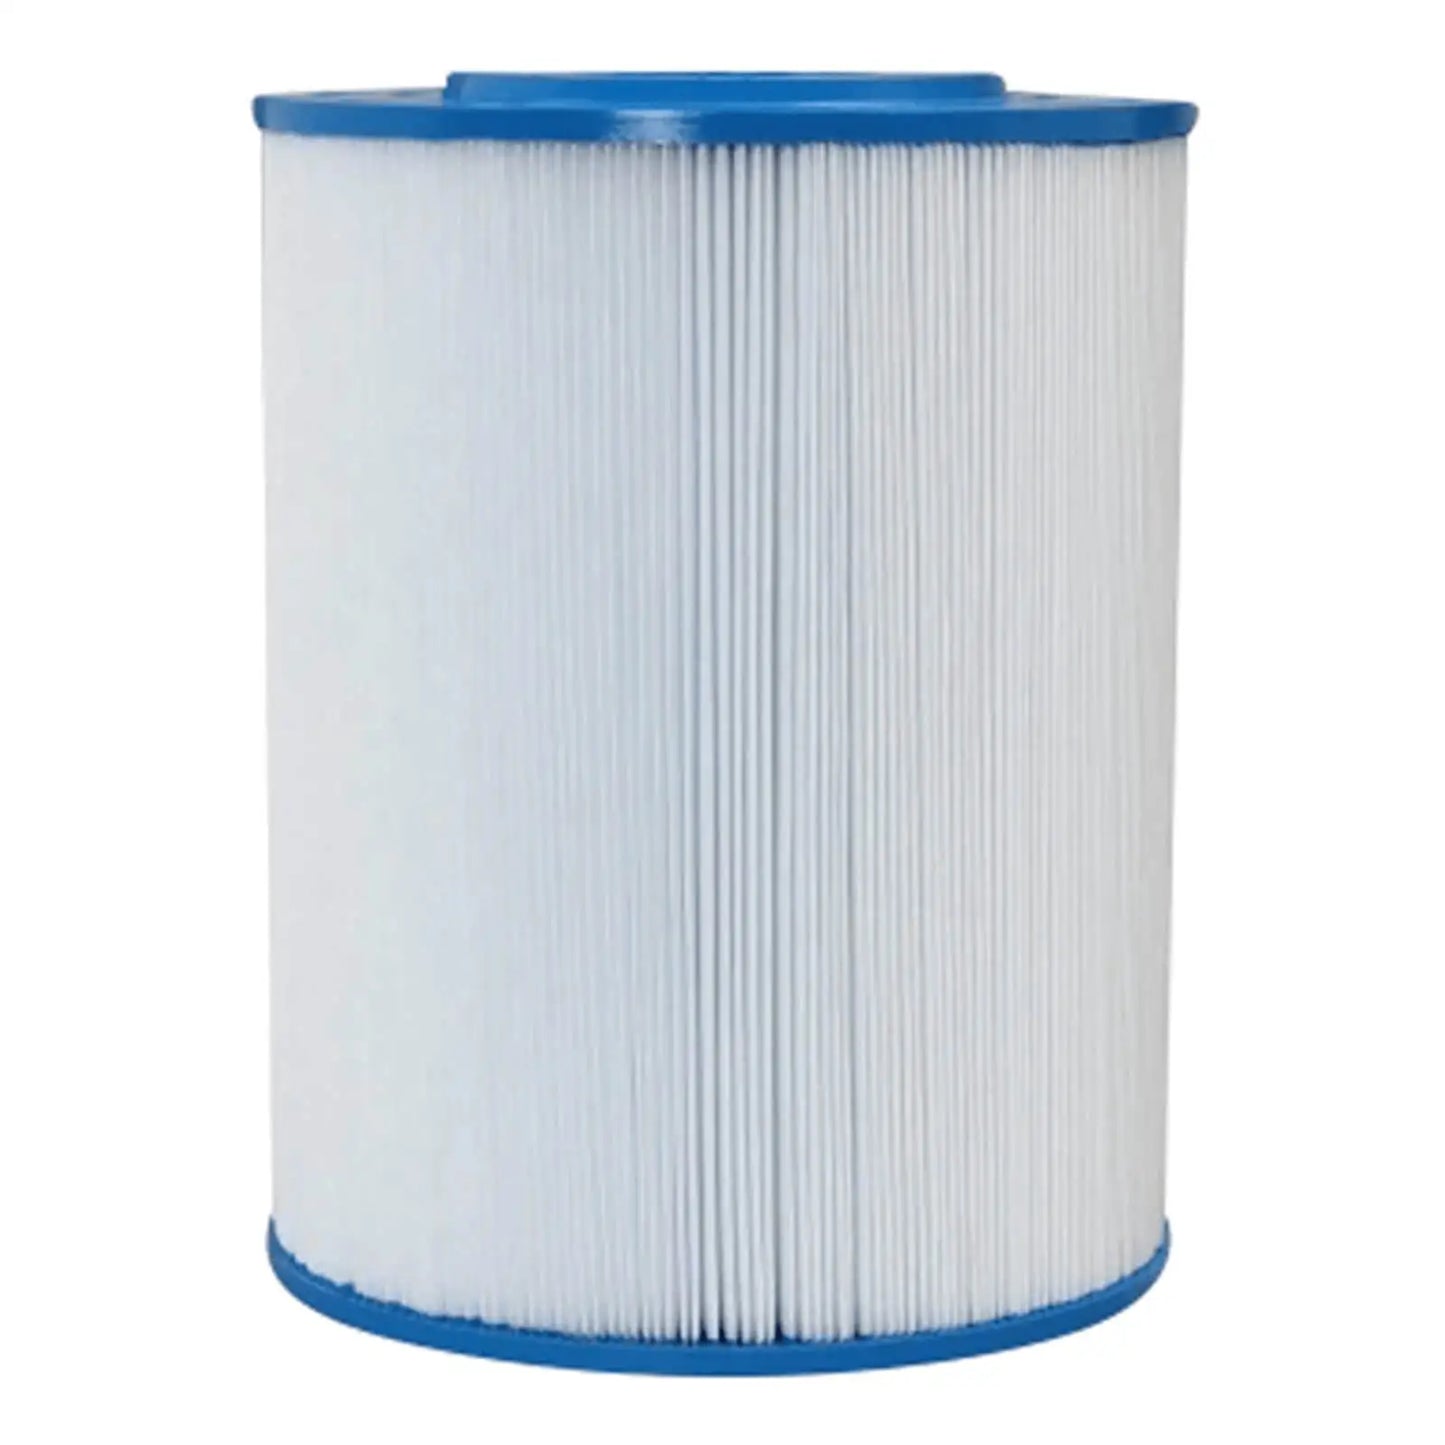 Astral Hurlcon ZX50 / ZX75 Filter Cartridge Replacement 78096 Sparesbarn